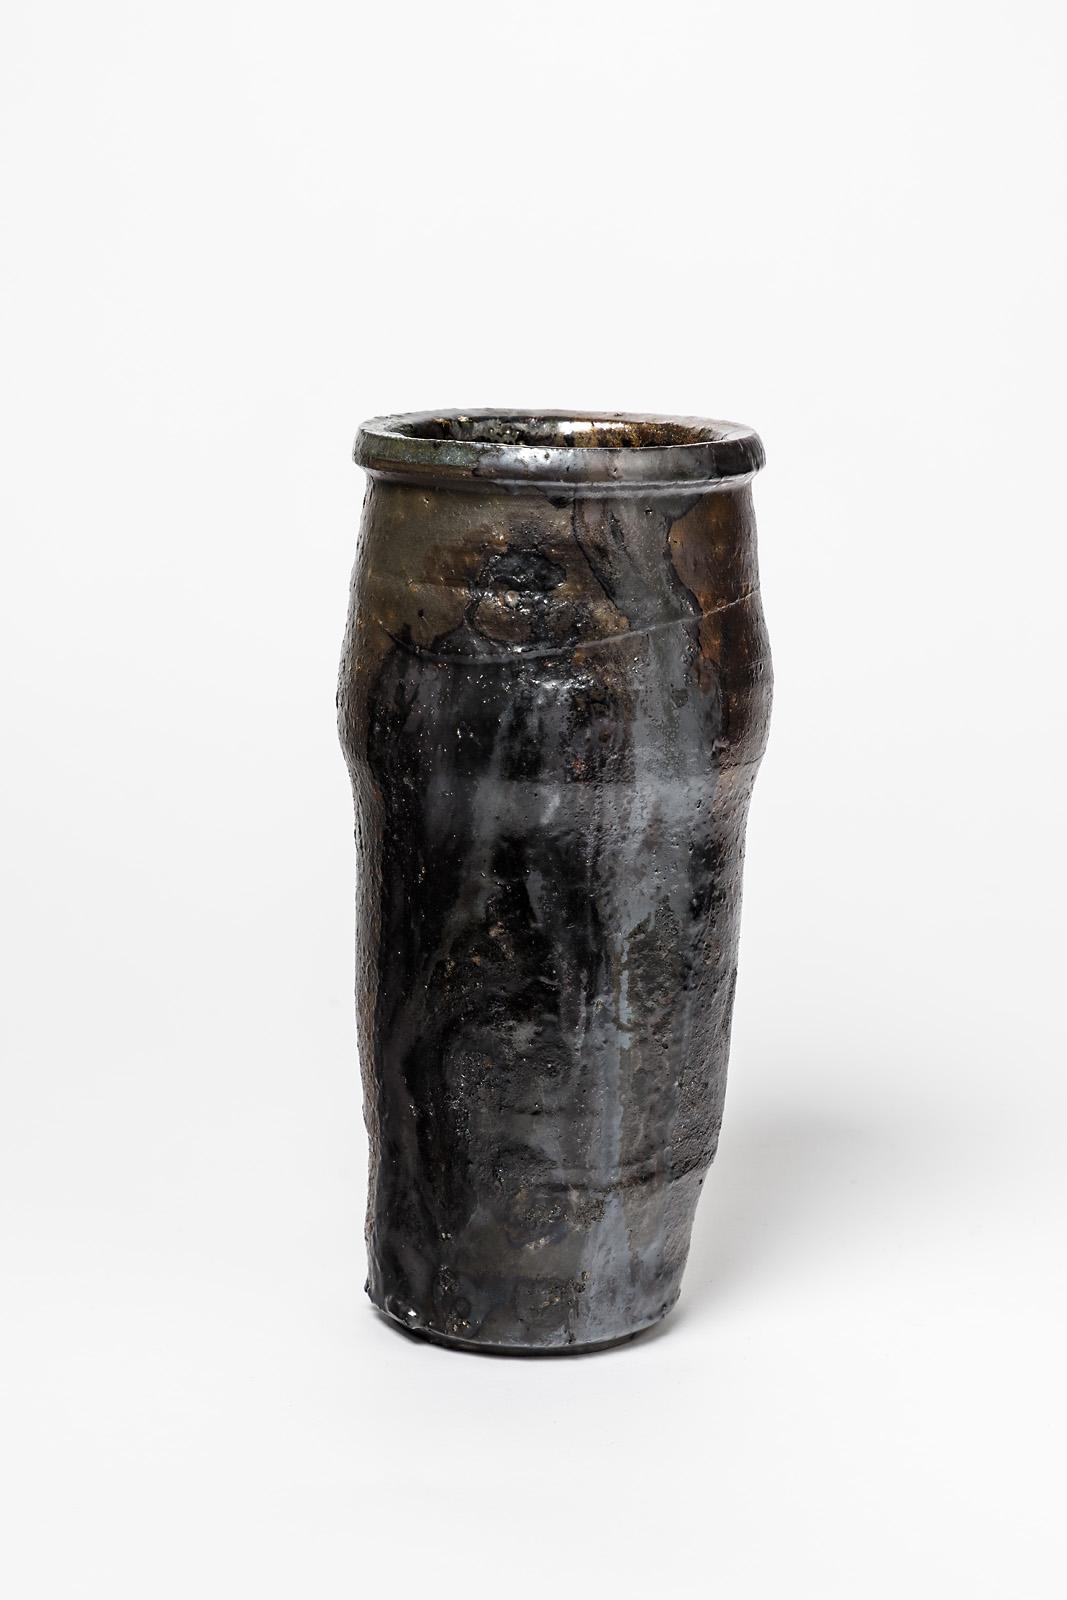 French Ceramic Vase by Camille Virot, circa 1990-2000 For Sale